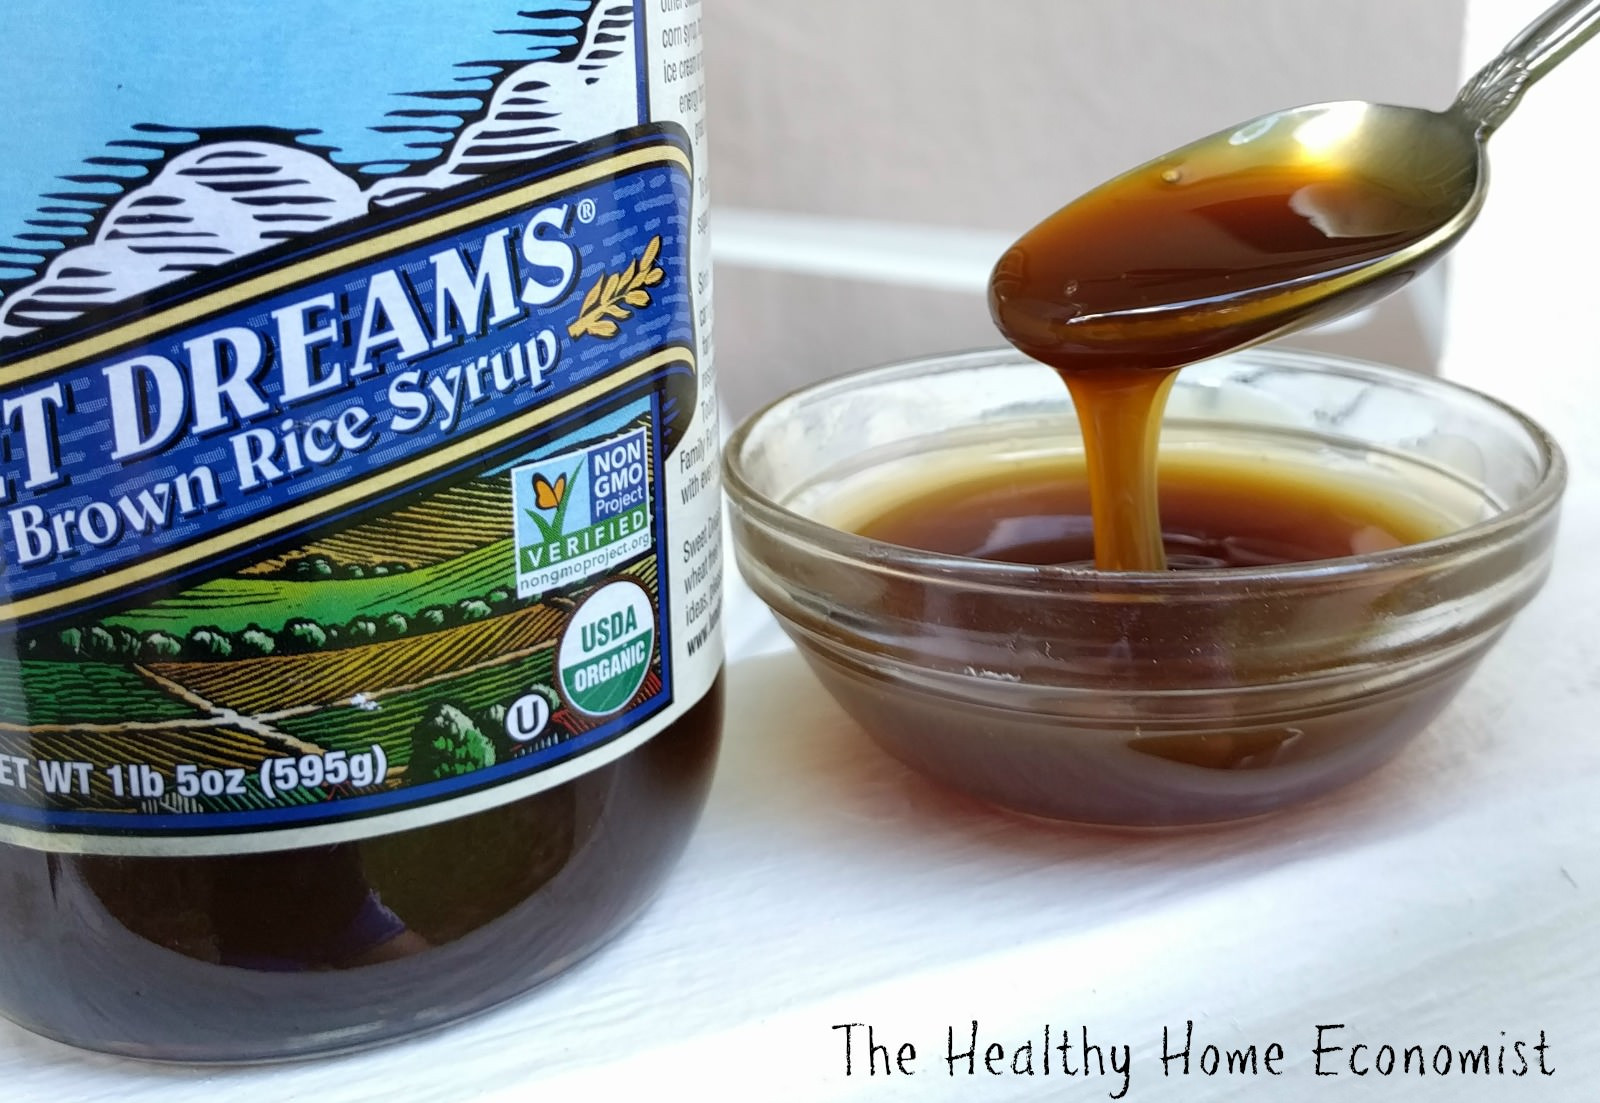 Is Brown Rice Syrup Healthy
 The Reality of Brown Rice Syrup